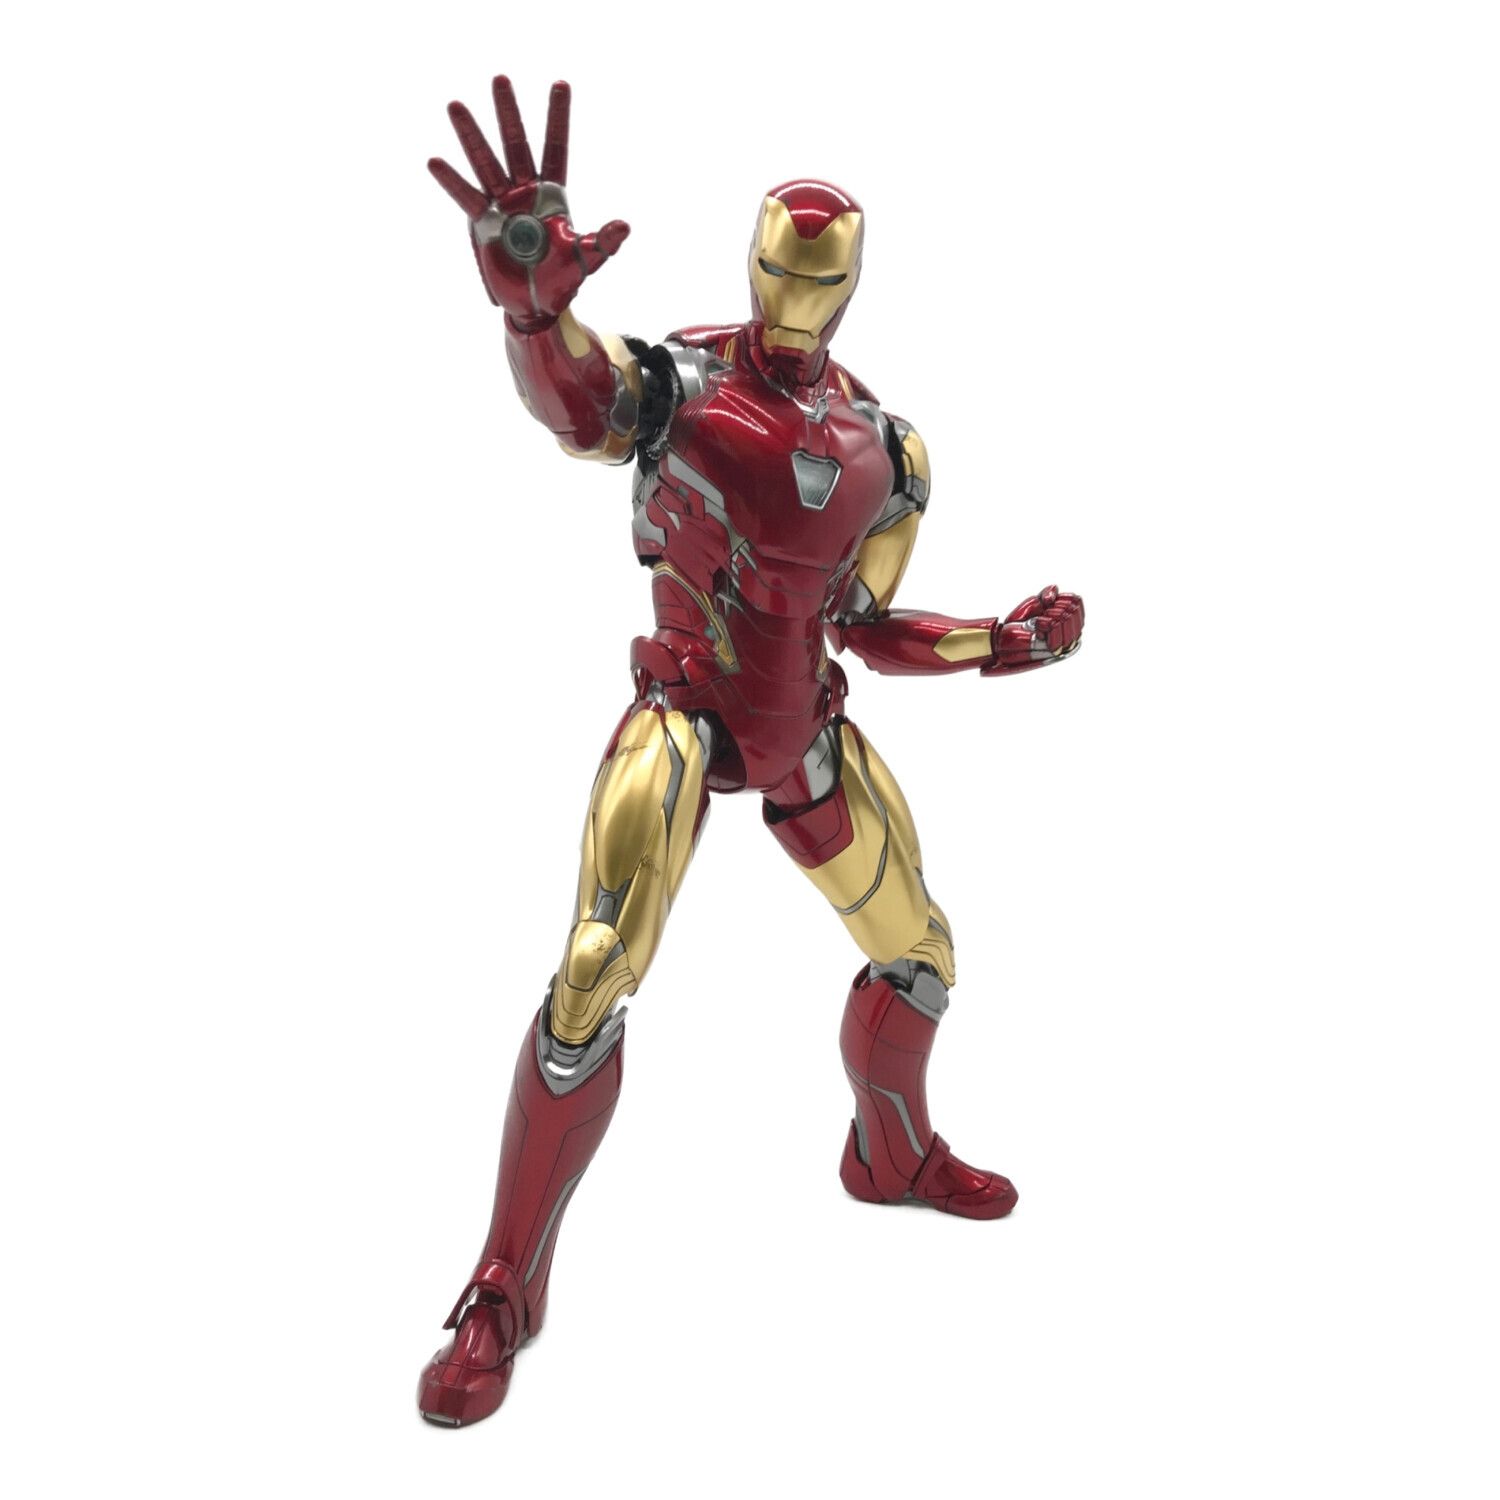 Hot toys (ホットトイズ) IRONMAN MARK VII MMS500-D27 1/6TH SCALE